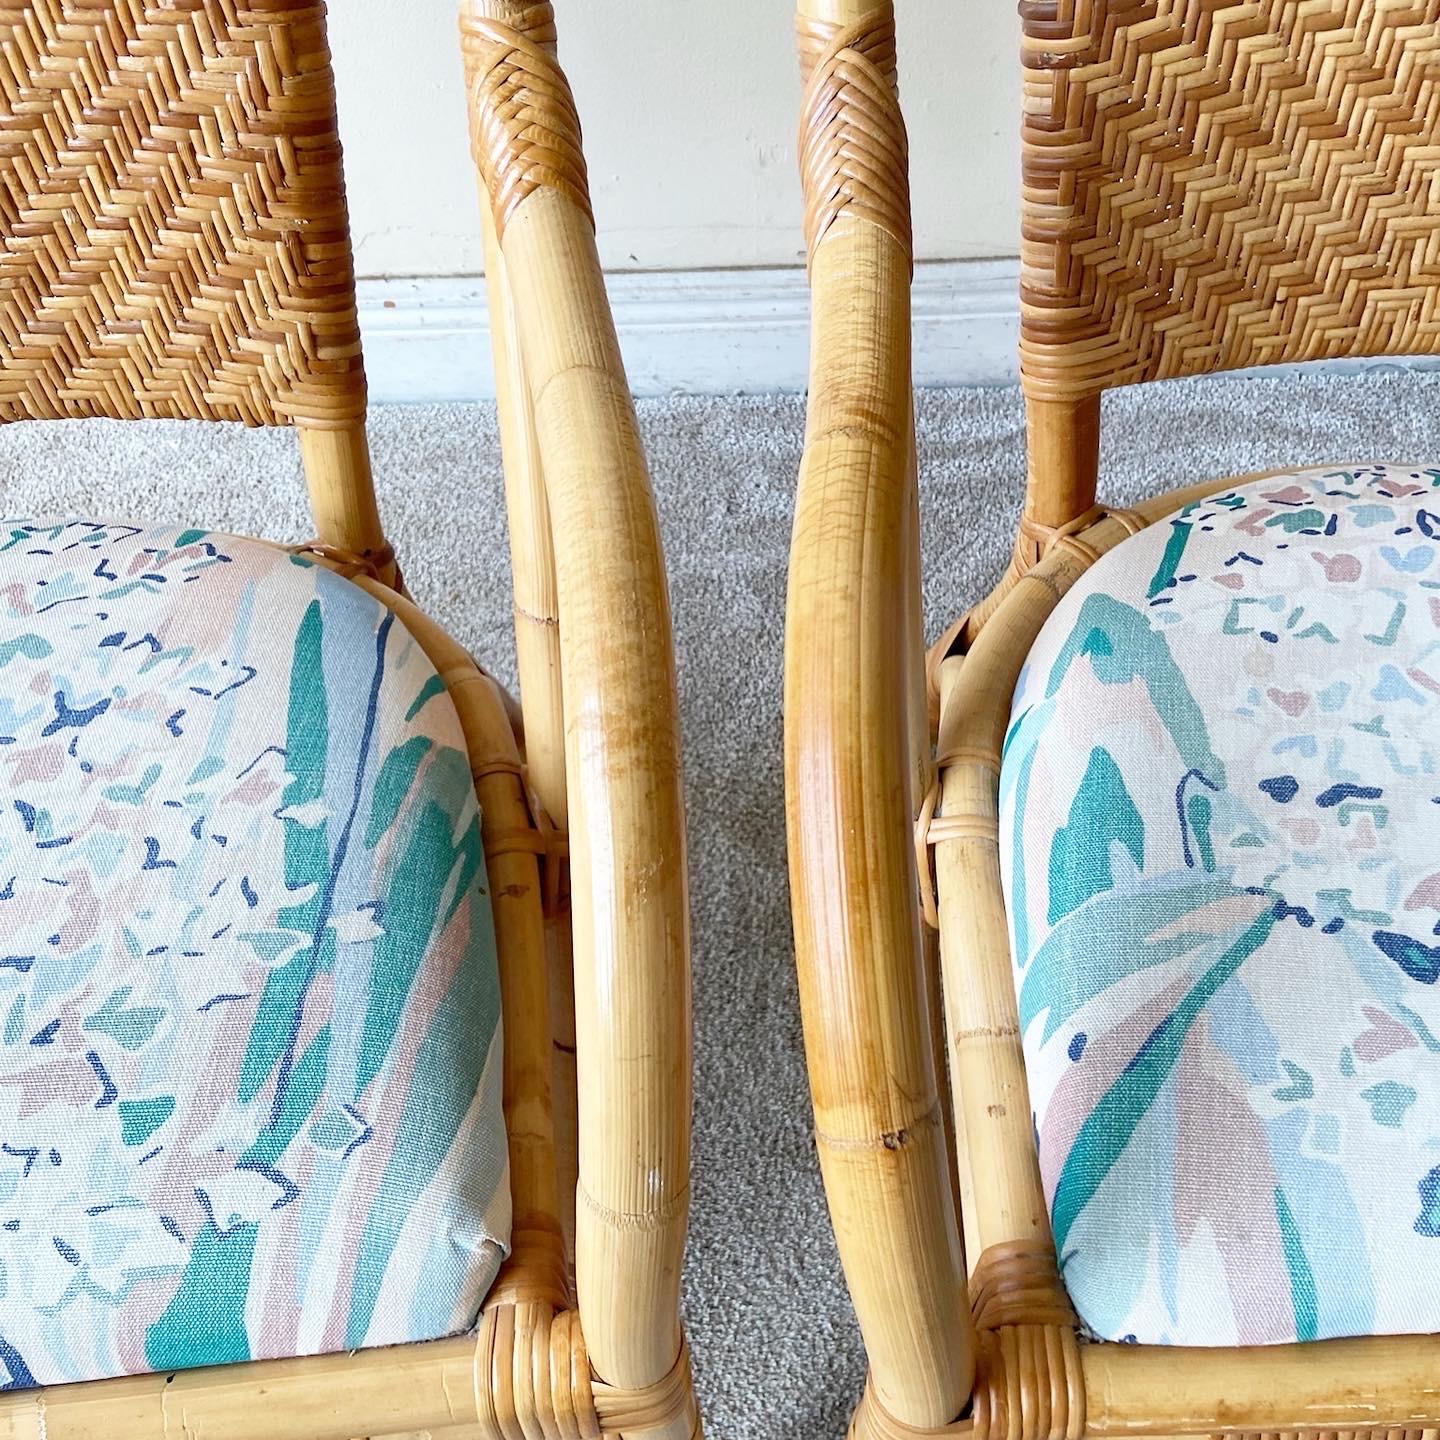 Boho Chic Bamboo Rattan and Wicker Arm Chairs In Good Condition For Sale In Delray Beach, FL